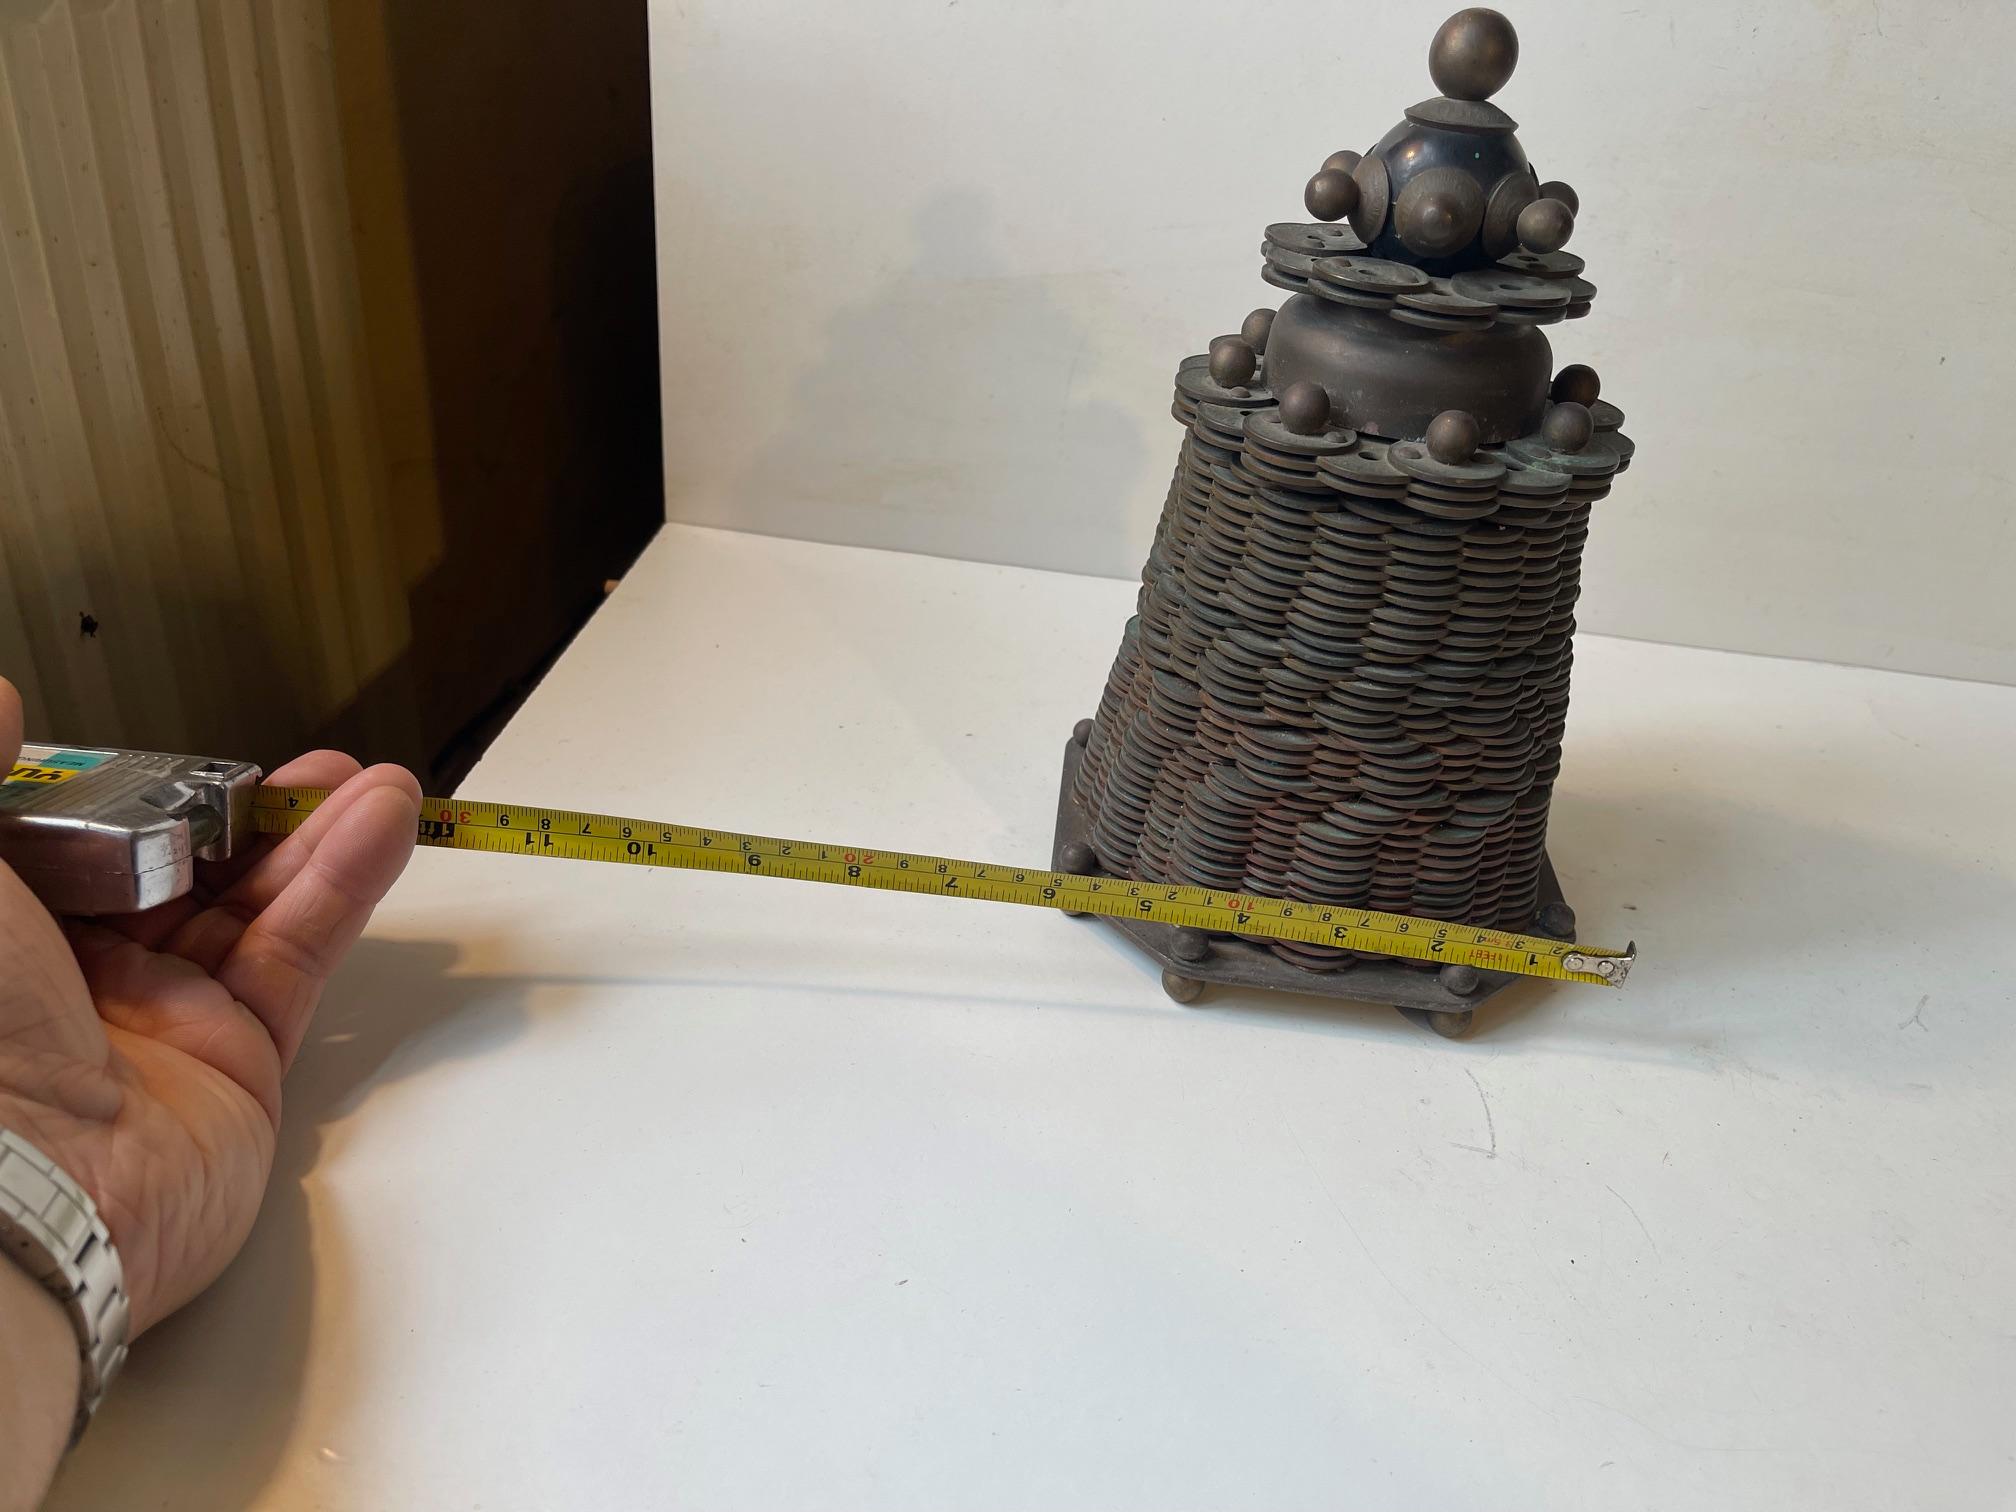 Vintage Danish Hippie Up-cycled Coin Mountain Sculpture, 1970s For Sale 2